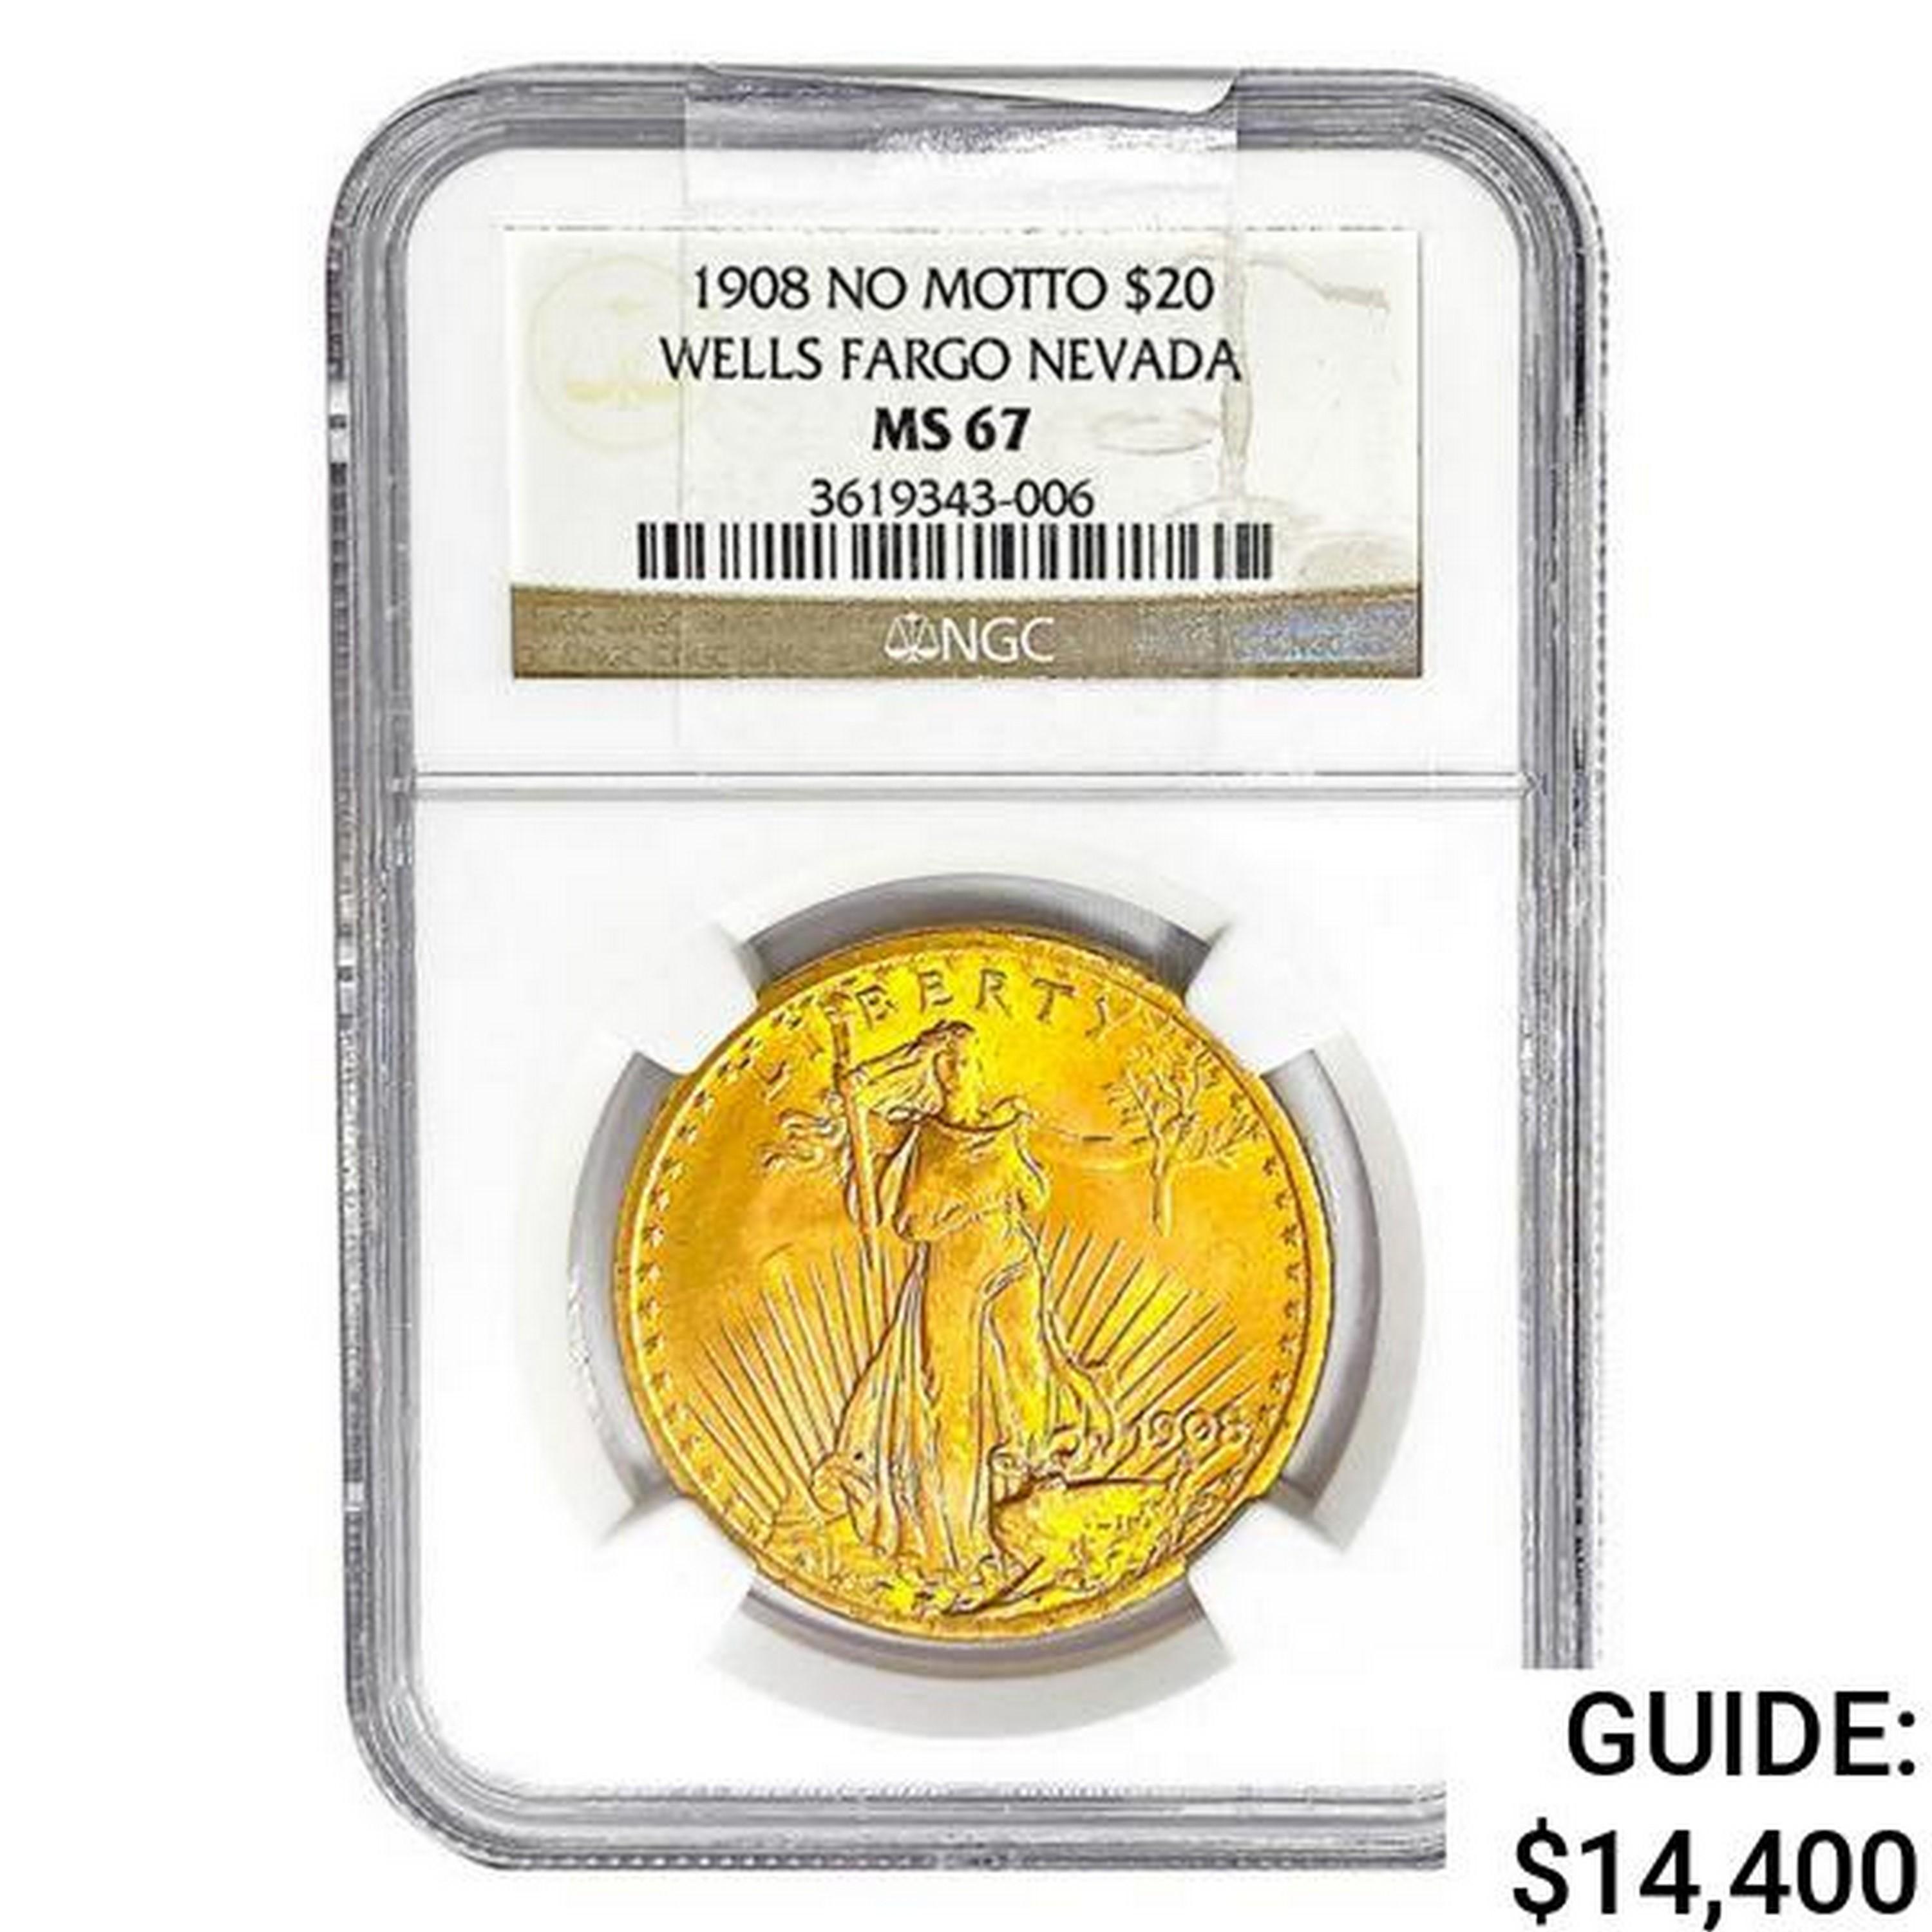 1908 $20 Gold Double Eagle NGC MS67 No Motto Wells